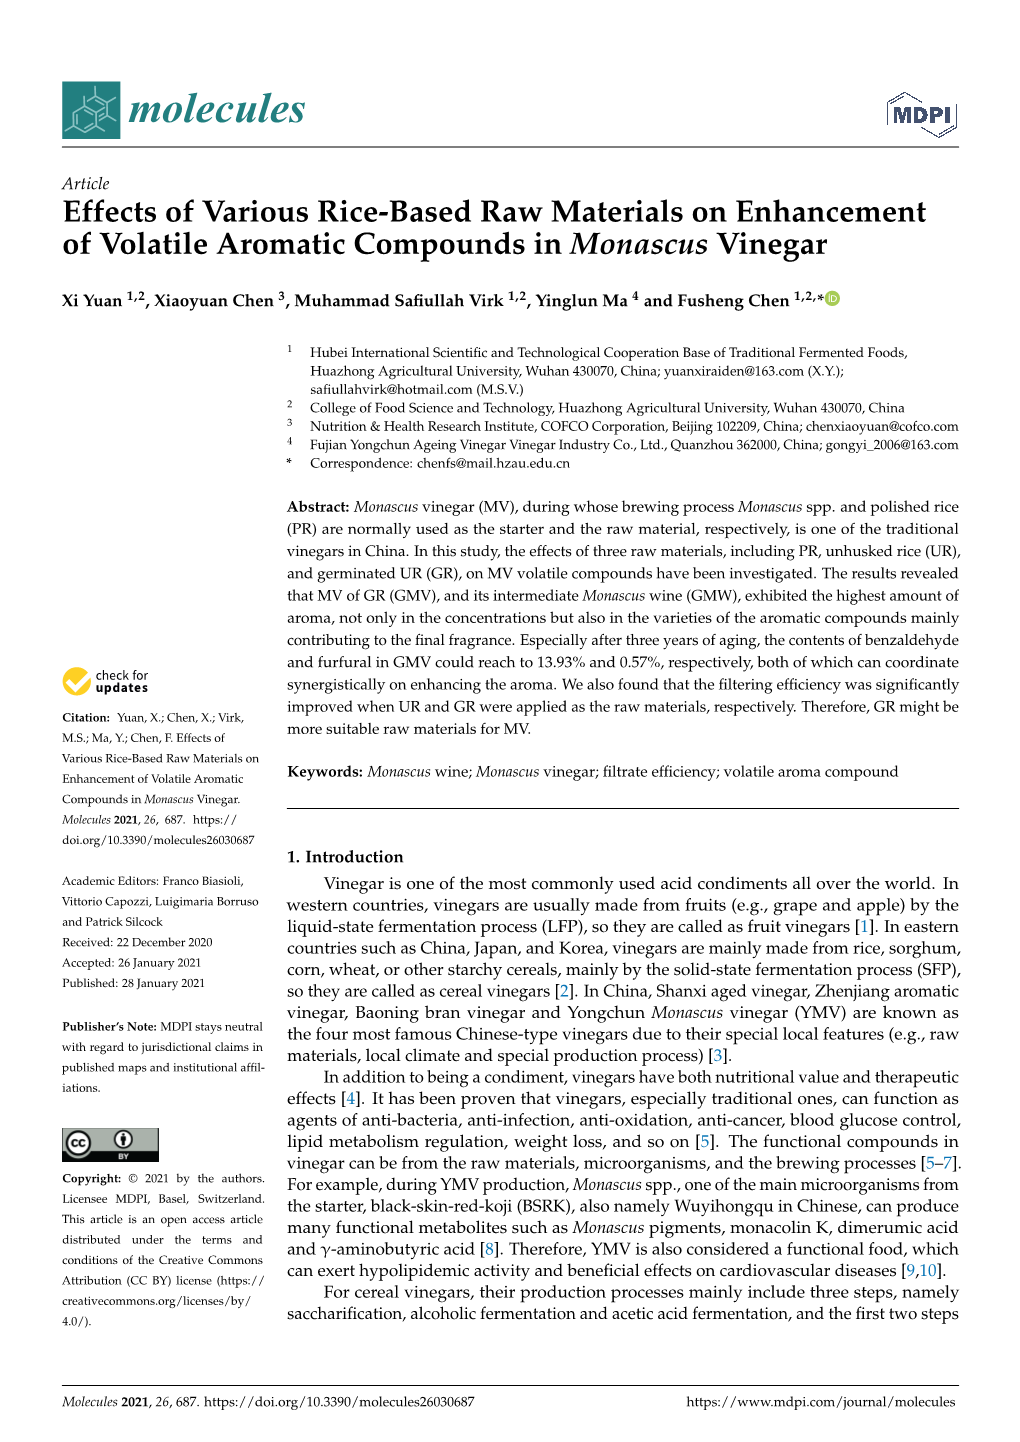 Effects of Various Rice-Based Raw Materials on Enhancement of Volatile Aromatic Compounds in Monascus Vinegar